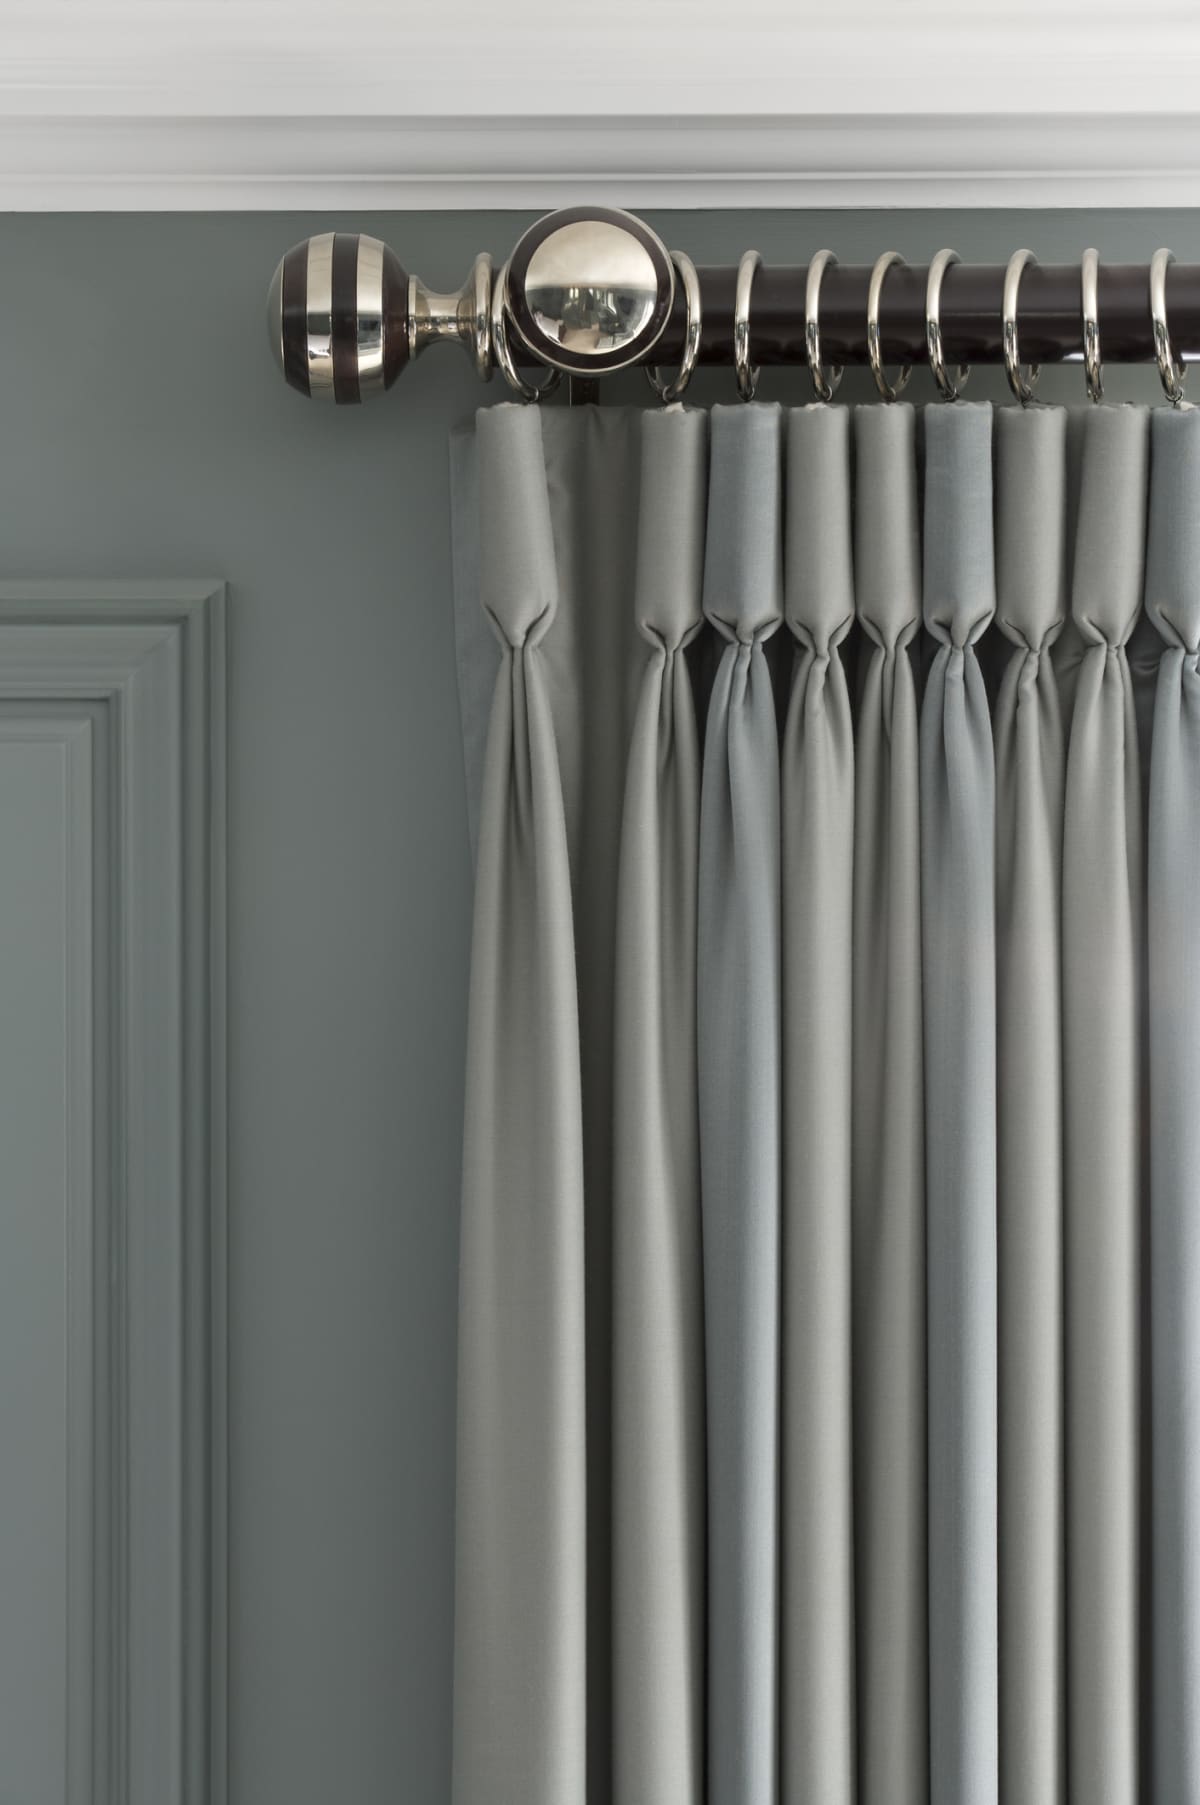 beautiful grey-green curtains hanging from a wood and metal curtain rail with metal rings and set against a green wall with white cornice.